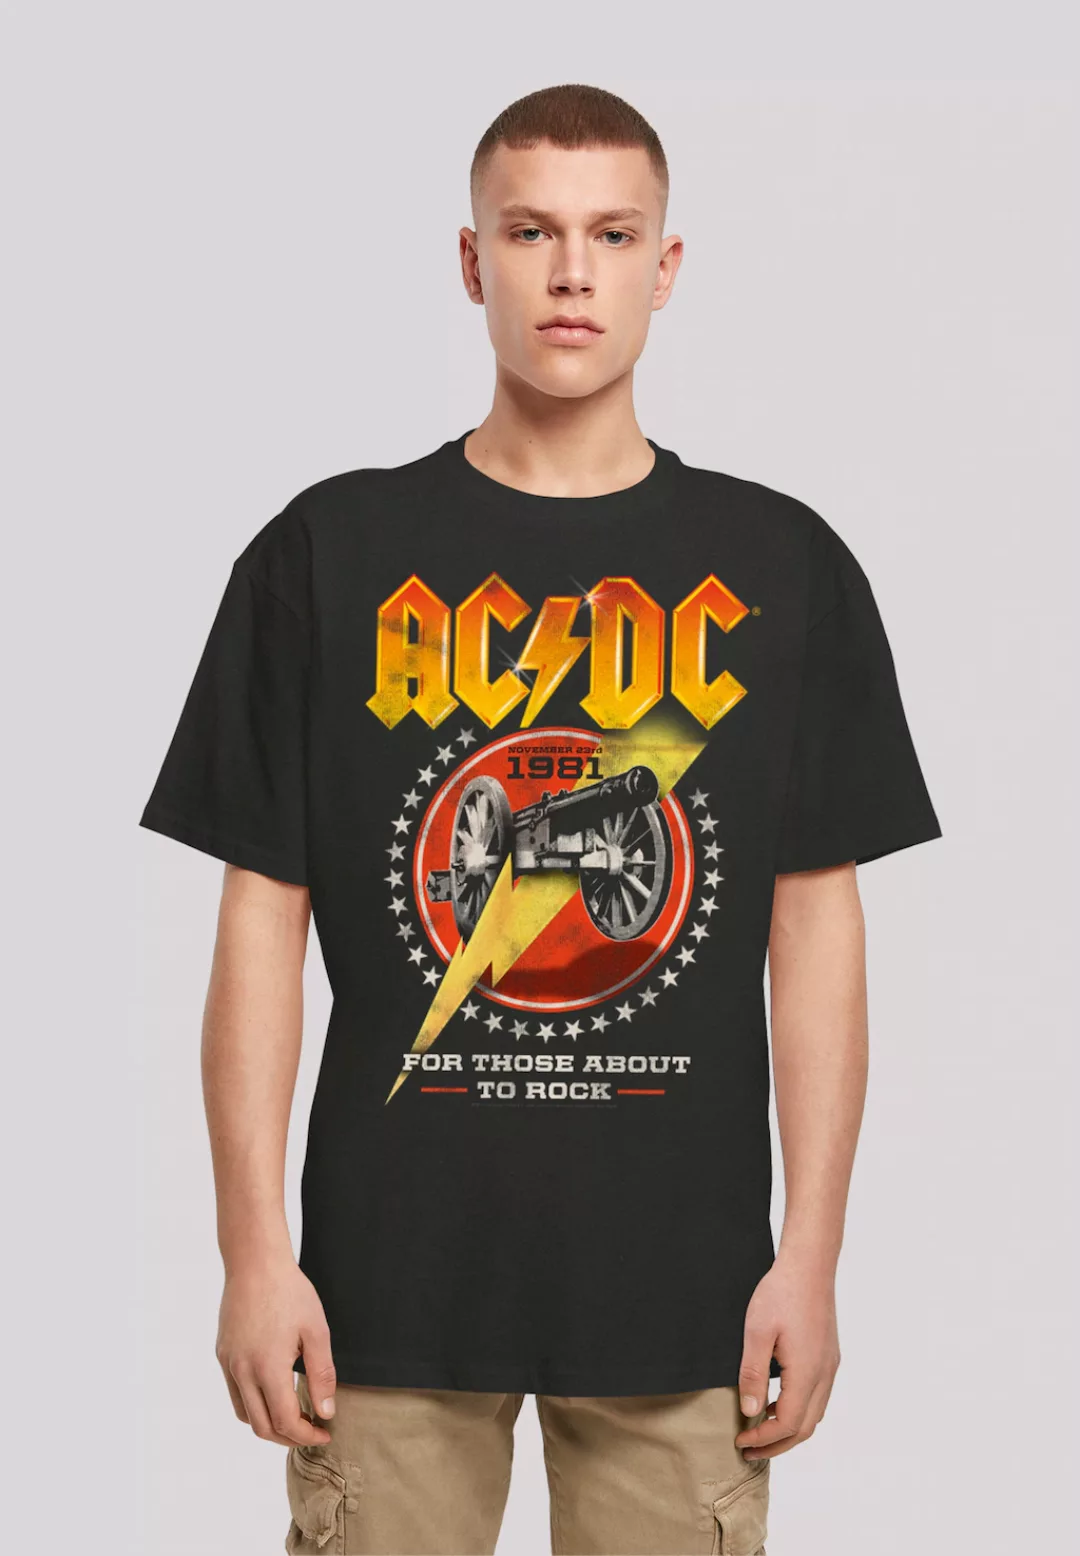 F4NT4STIC T-Shirt "ACDC Rock Band Shirt For Those About To Rock 1981" günstig online kaufen